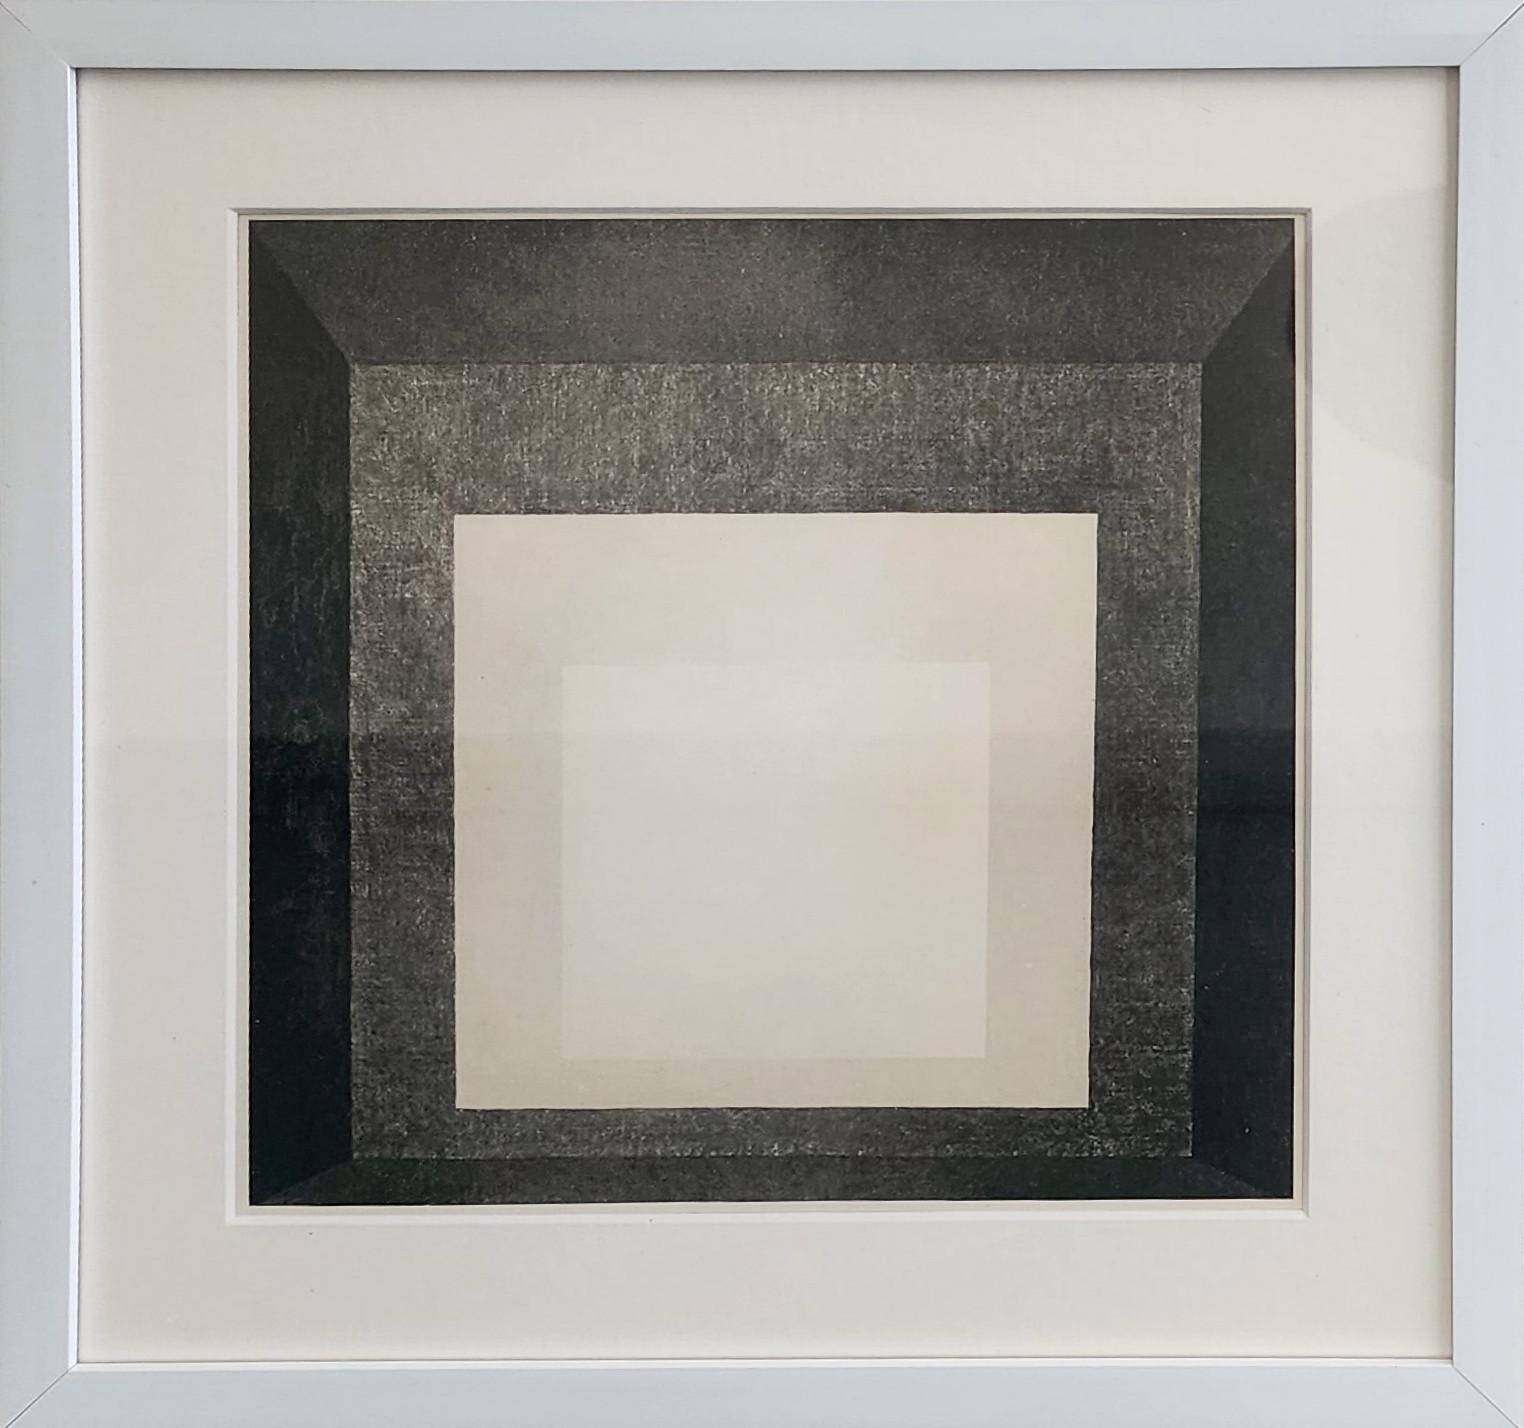 Homage to the Square (Hommage au Carre)  (Bauhaus, Geometric Abstraction) - Print by (after) Josef Albers